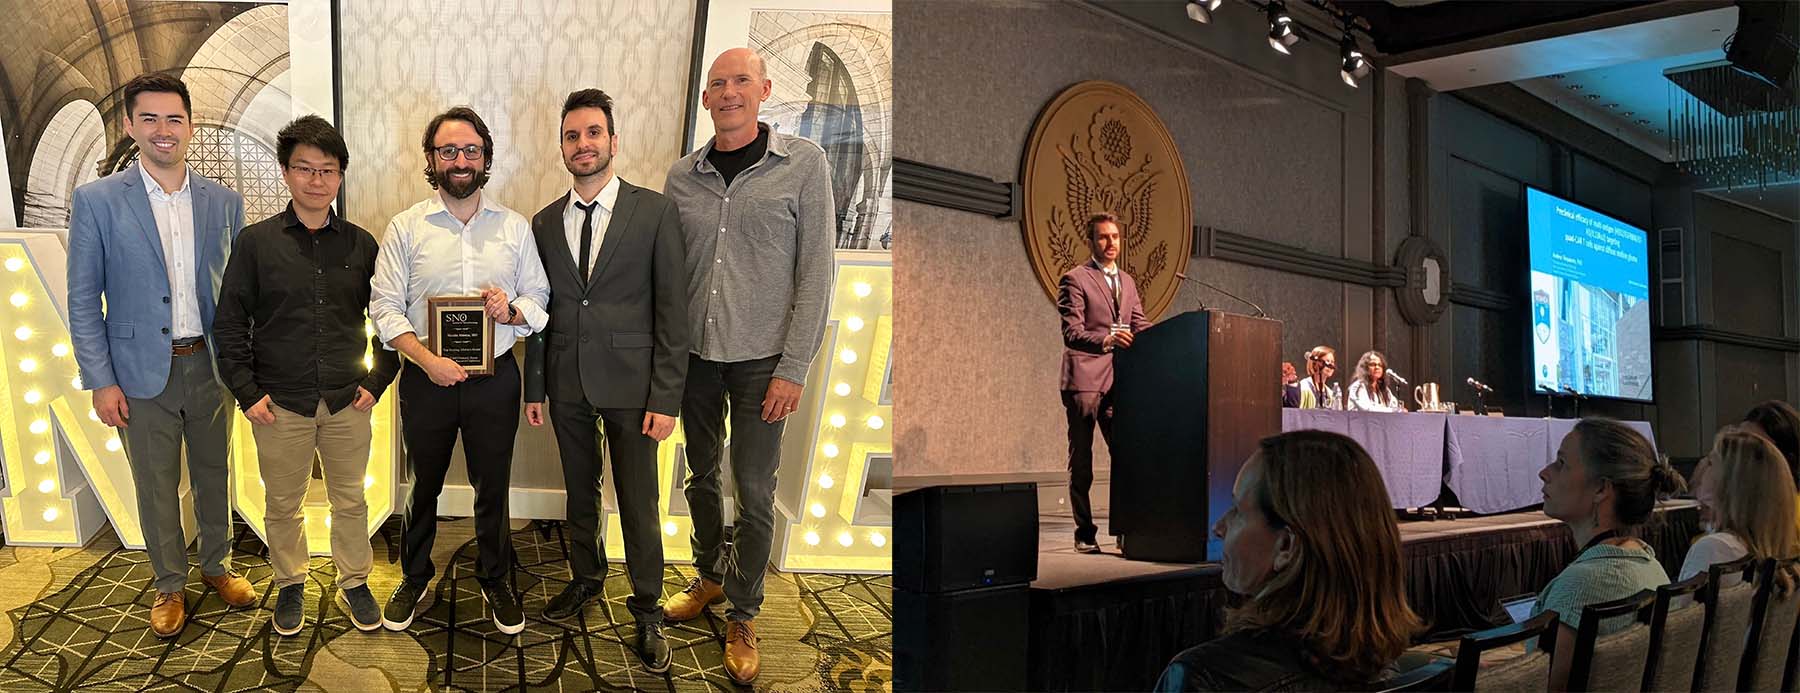 Dr. Vitanza holding the Top Scoring Abstract Award at the Pediatric Society of Neuro-Oncology Conference (left). Dr. Timpanaro presenting at a lecturn (right).